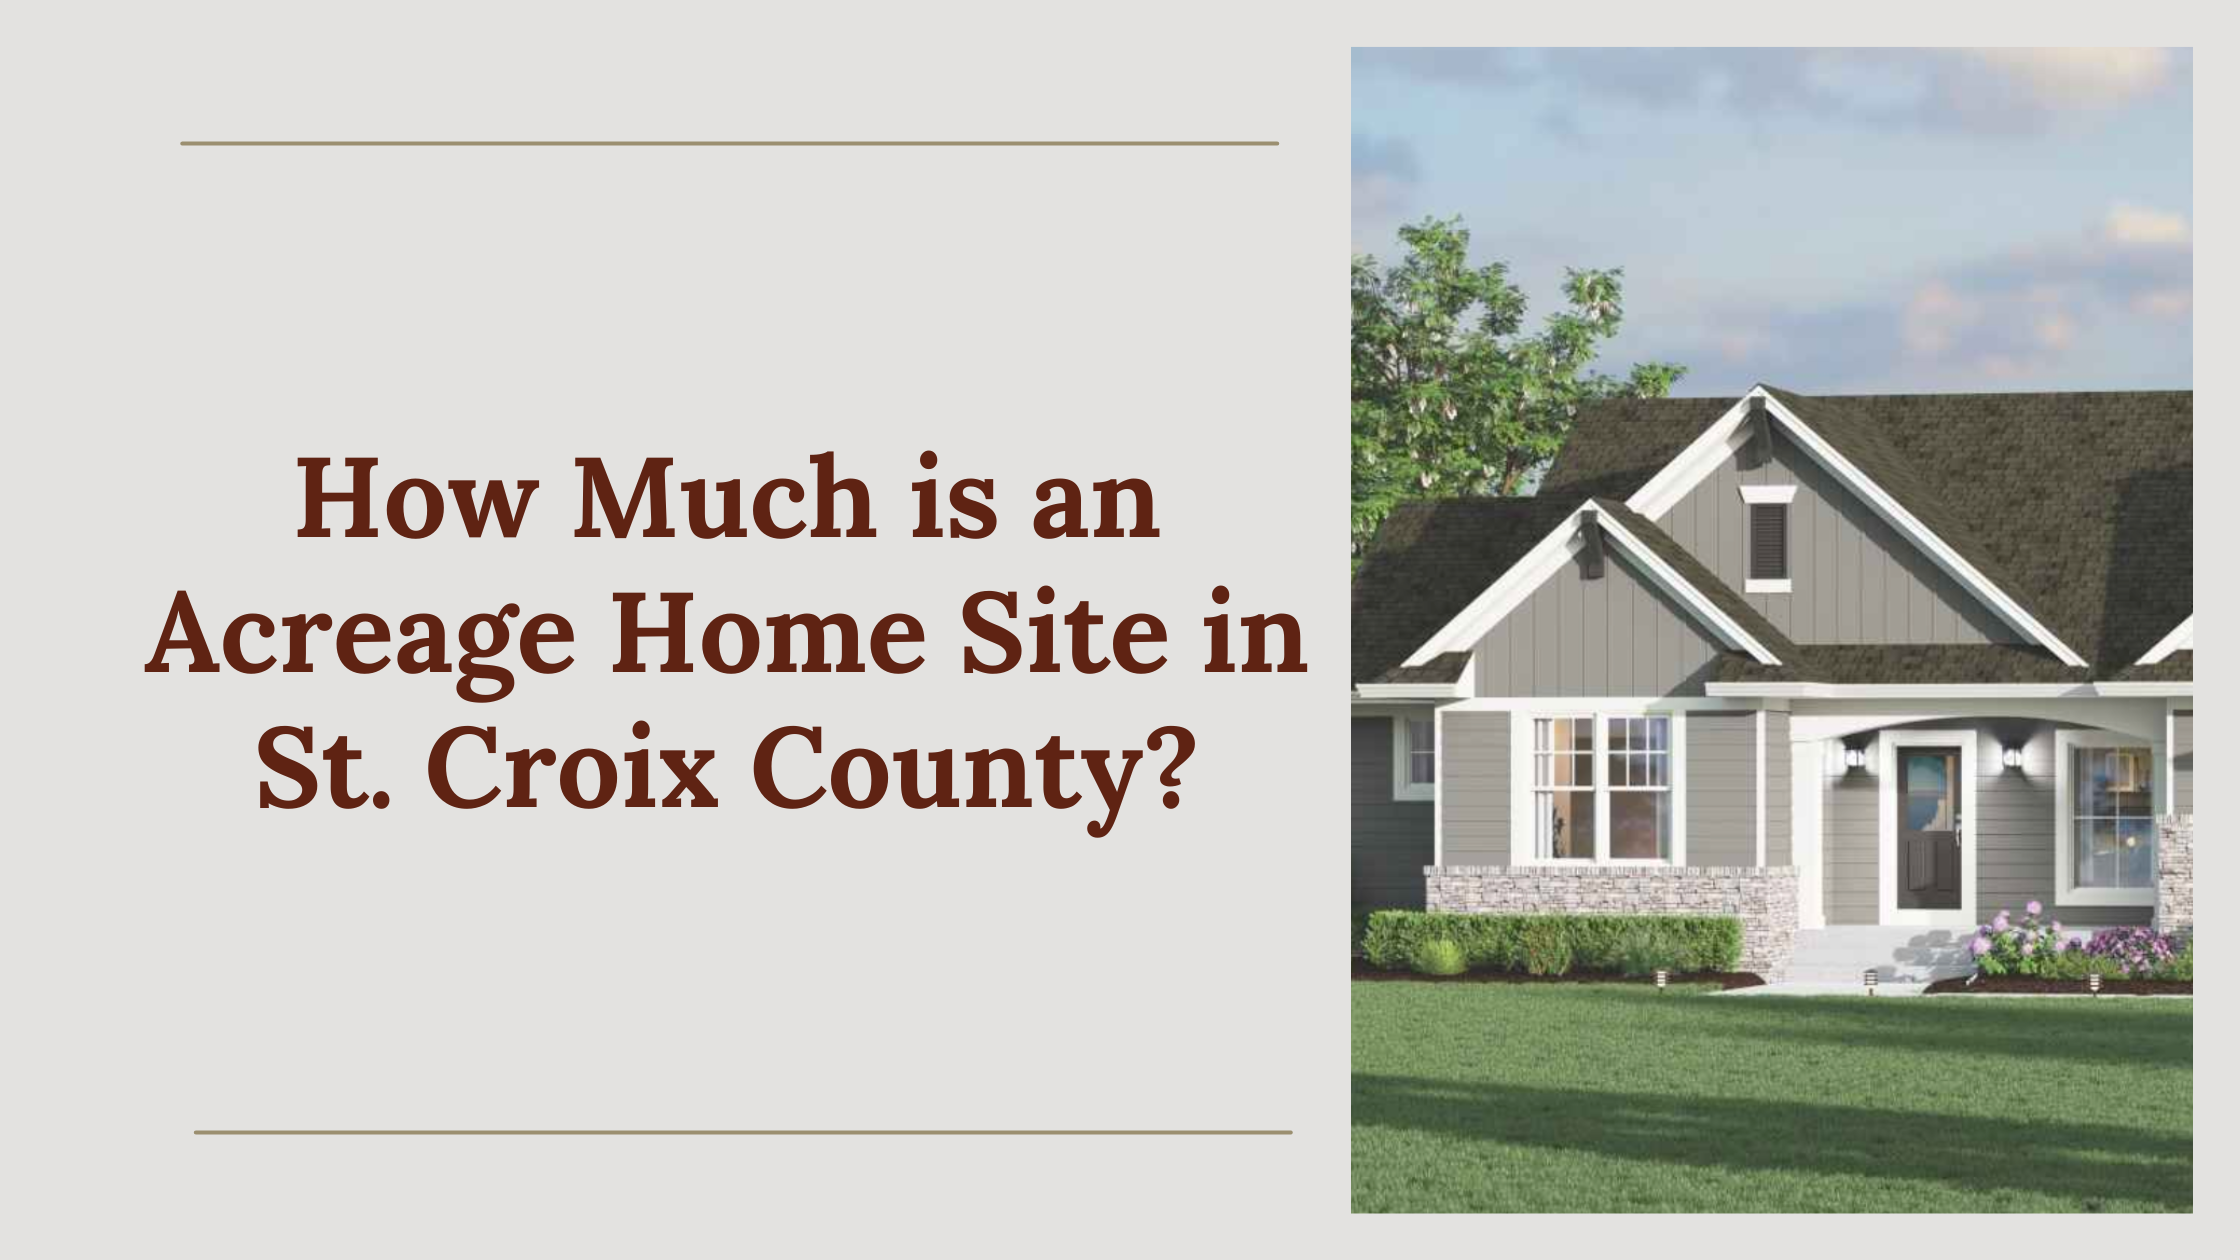 How Much is an Acreage Home Site in St. Croix County